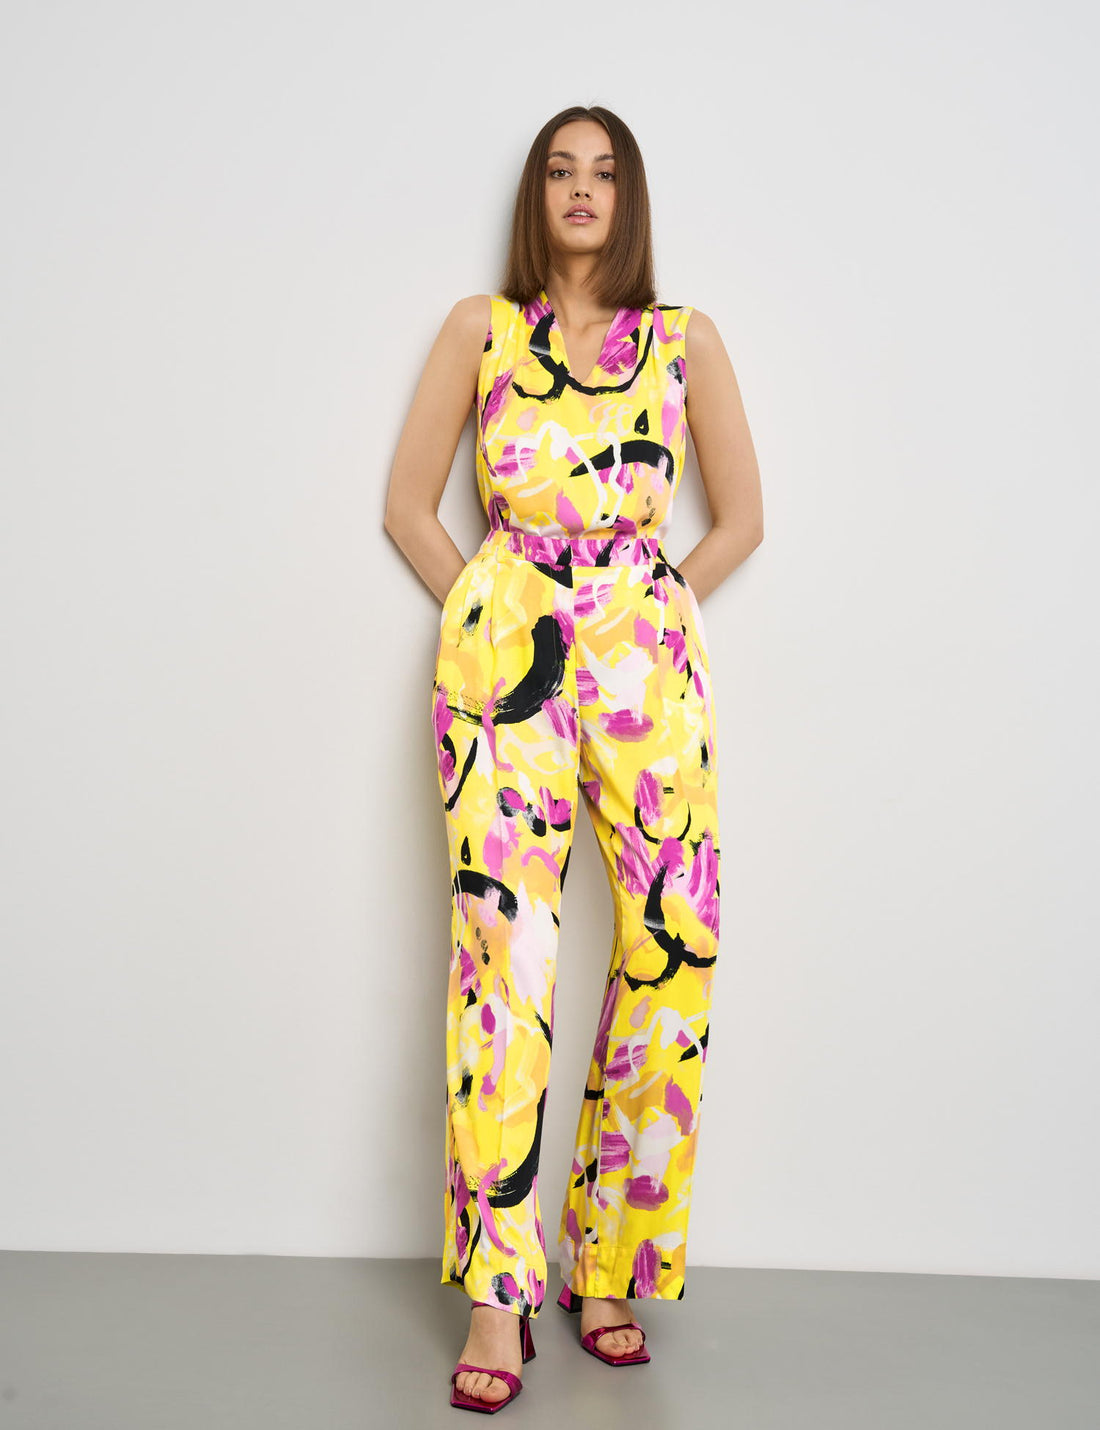 Flowing Palazzo Trousers With A Floral Print_520308-11019_4142_01